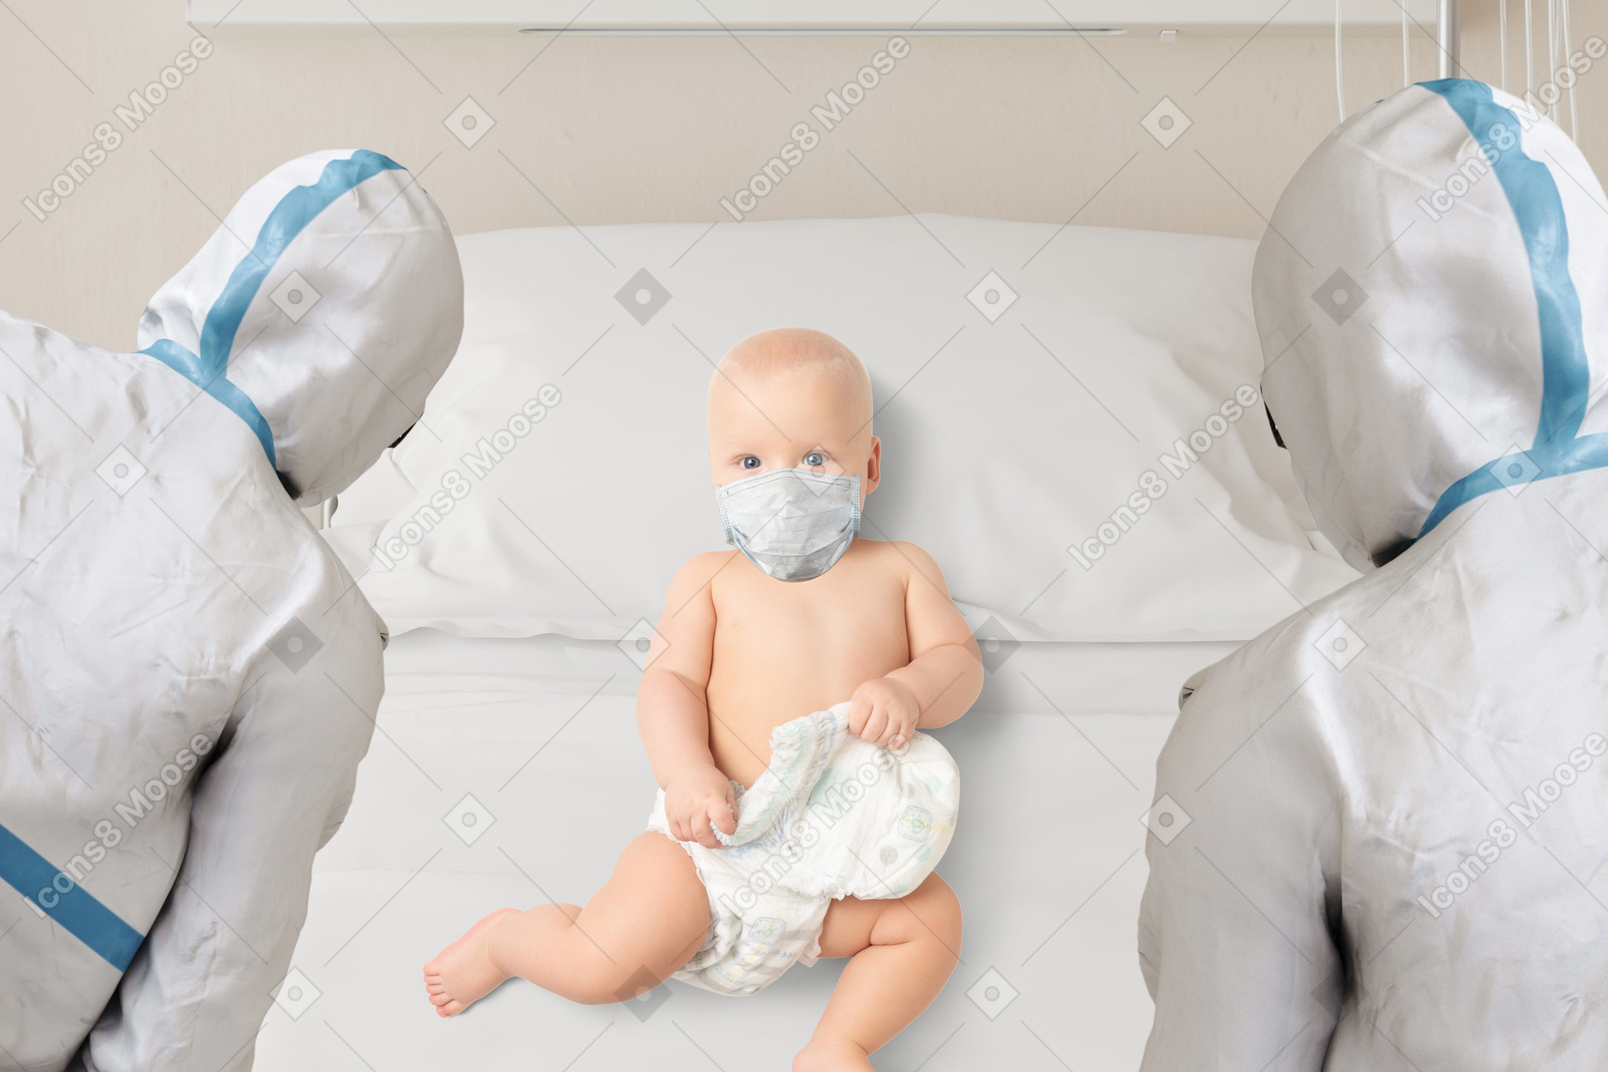 Baby lying on the hospital bed surrounded by doctors in protective gear